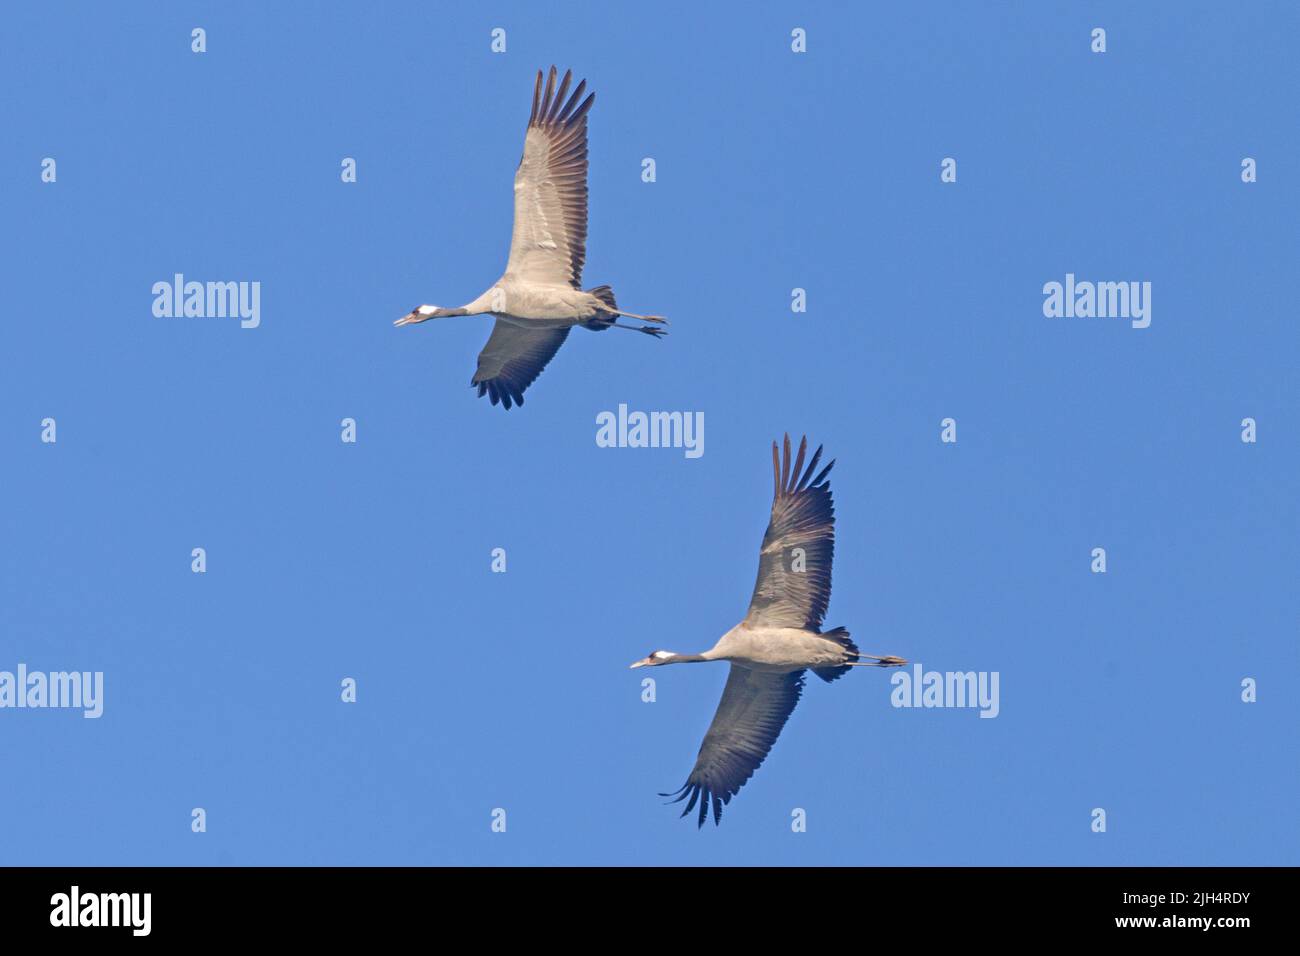 Common crane, Eurasian Crane (Grus grus), two cranes flying together in the blue sky, Germany, Mecklenburg-Western Pomerania Stock Photo